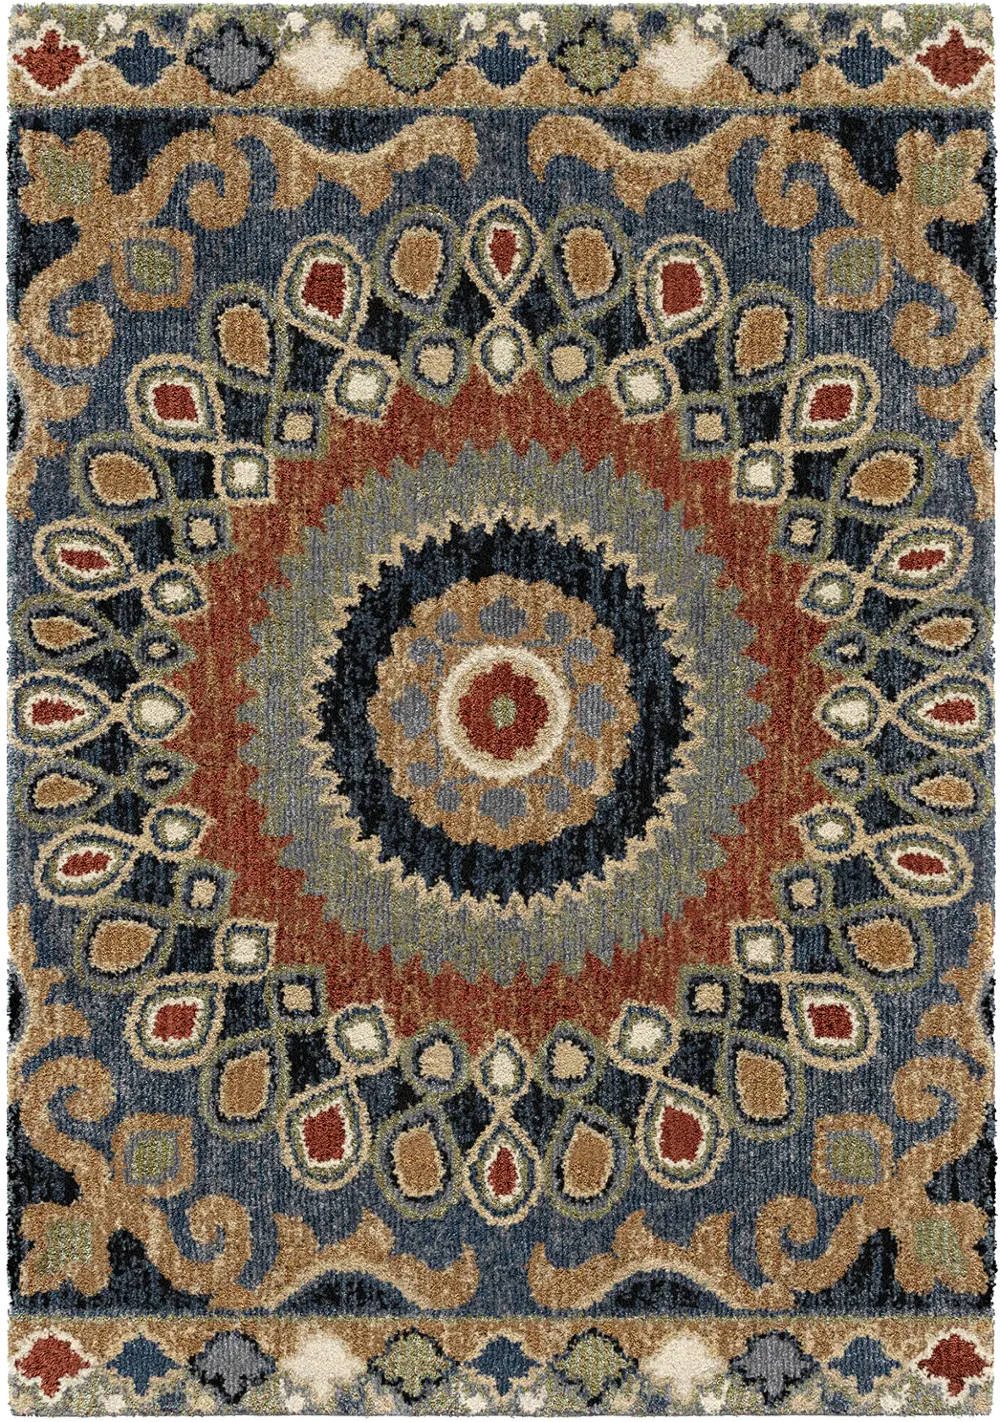 4412/8X11/WILDWEAVE Wild Weave 8 x 11 Indochina Blue, Red, and Green Area Rug-1